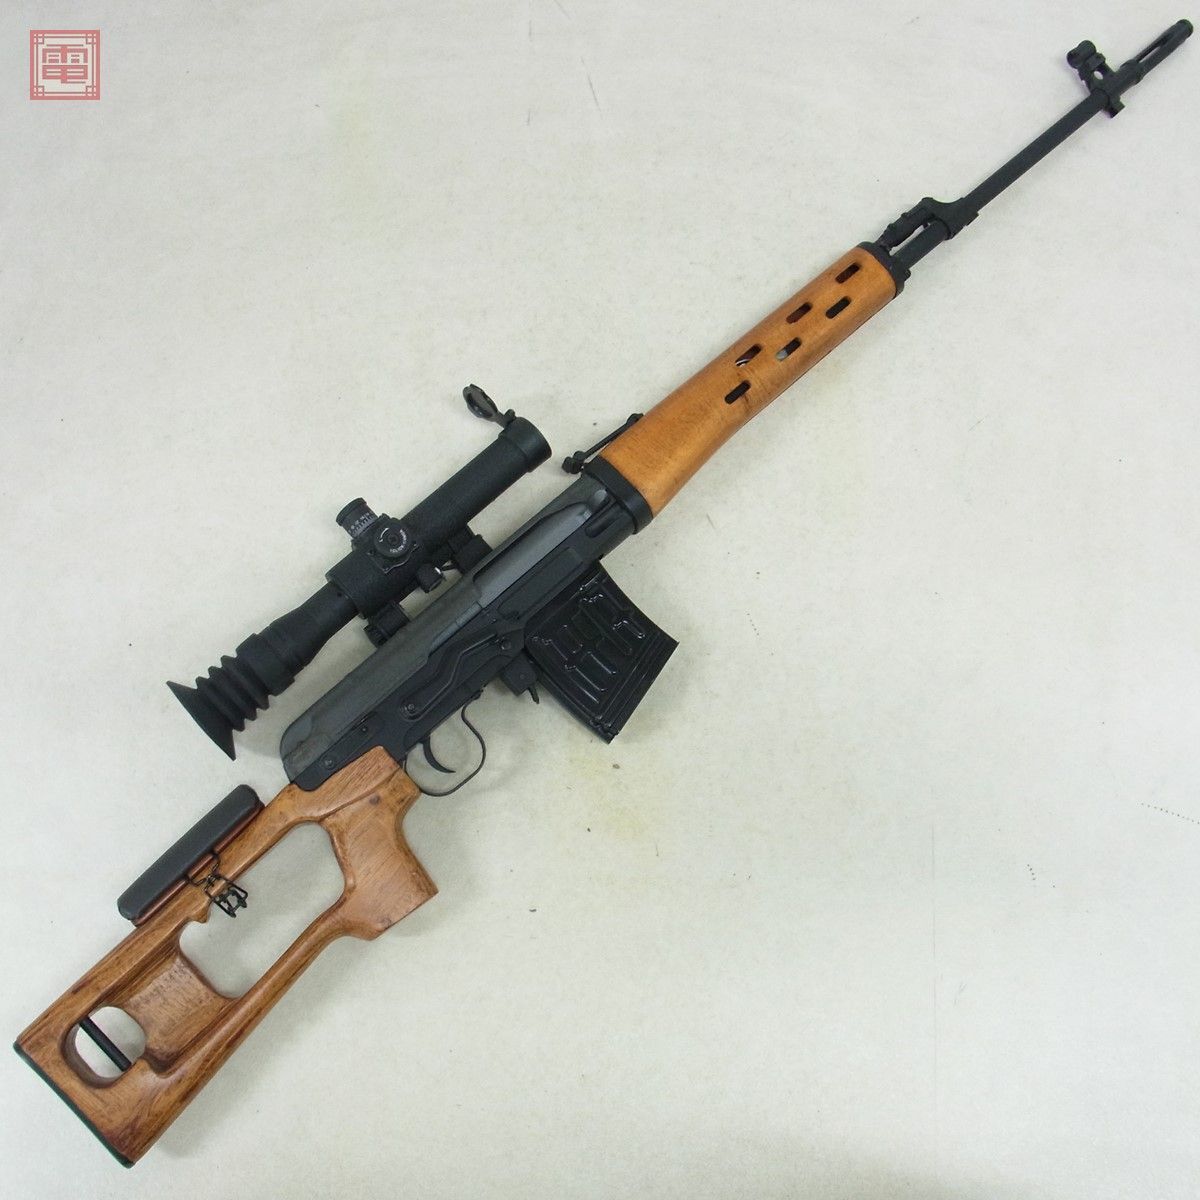 A&K electric gun SVD drag nof real wood wooden stock scope attaching present condition goods [60